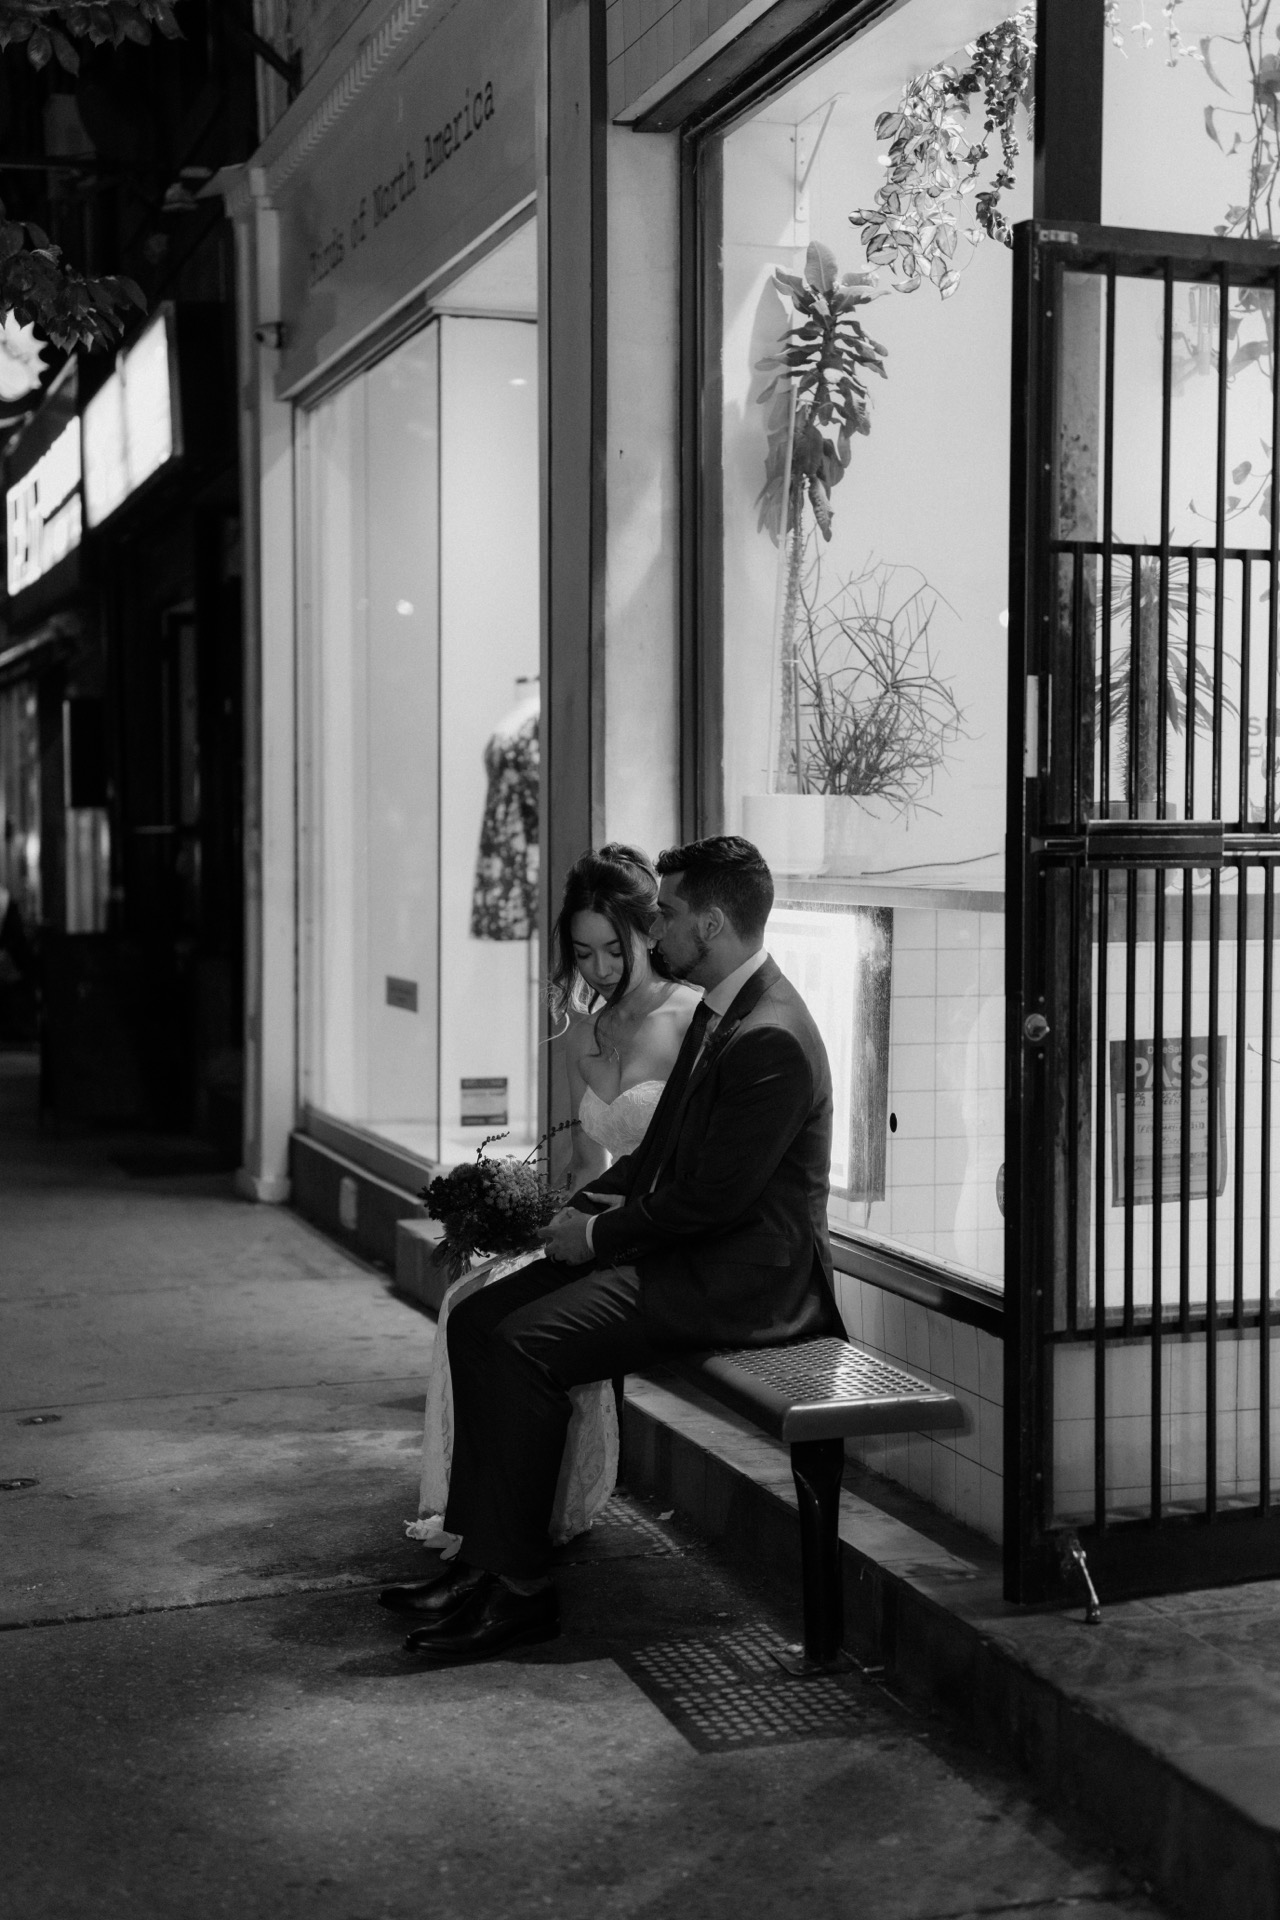 A couple in wedding attire sitting together on a bench at night outside a storefront.